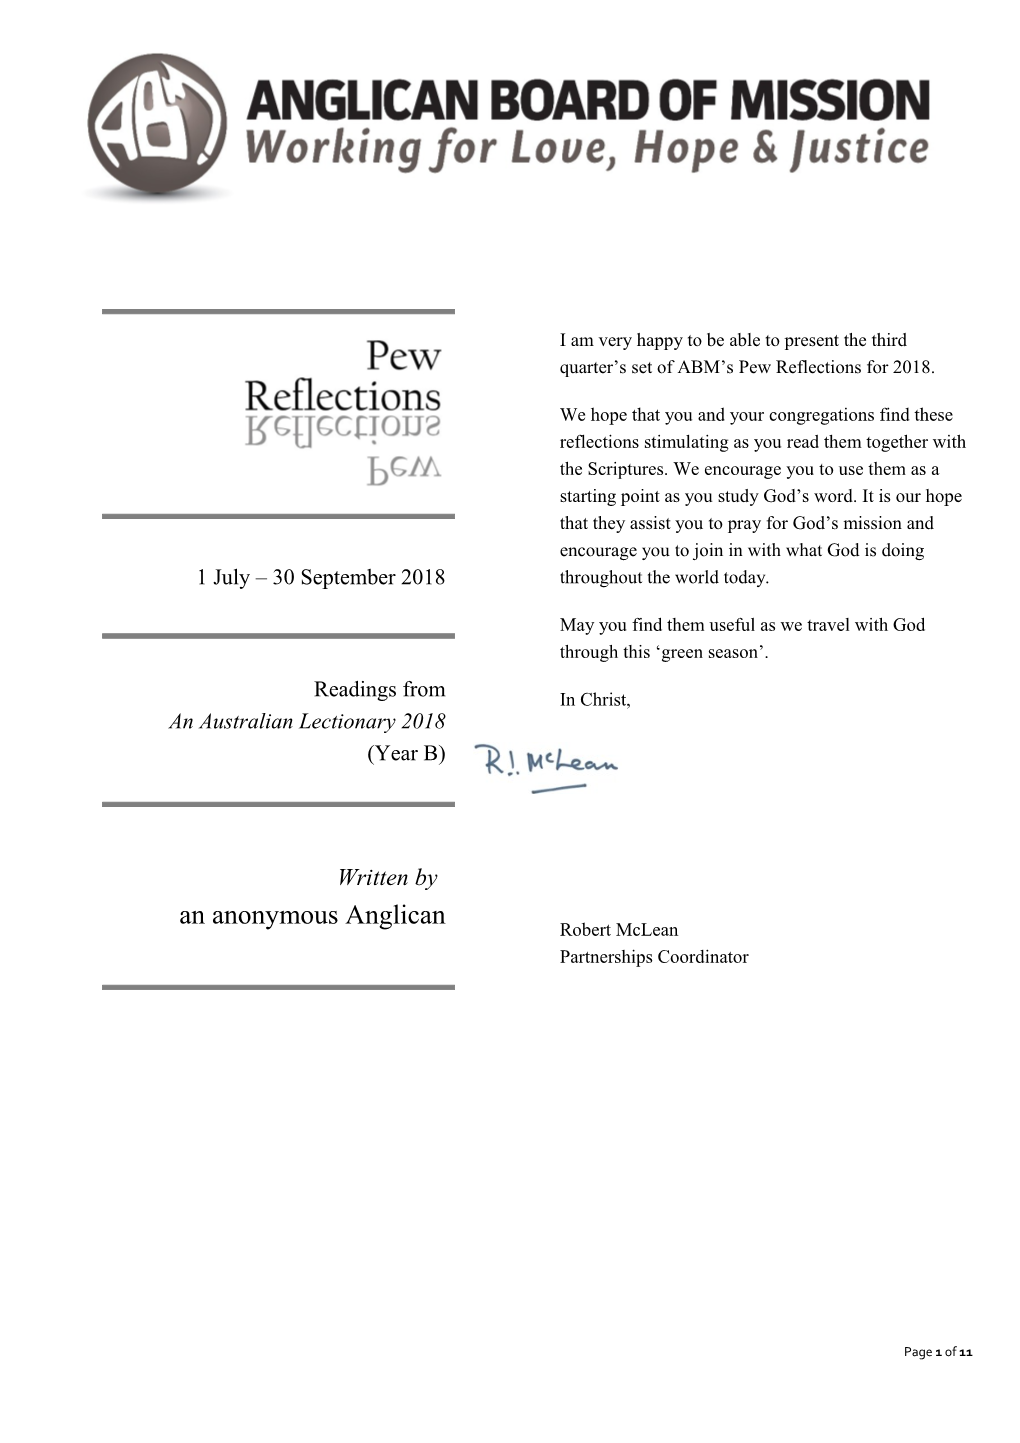 I Am Very Happy to Be Able to Present the Third Quarter S Set of ABM S Pew Reflections